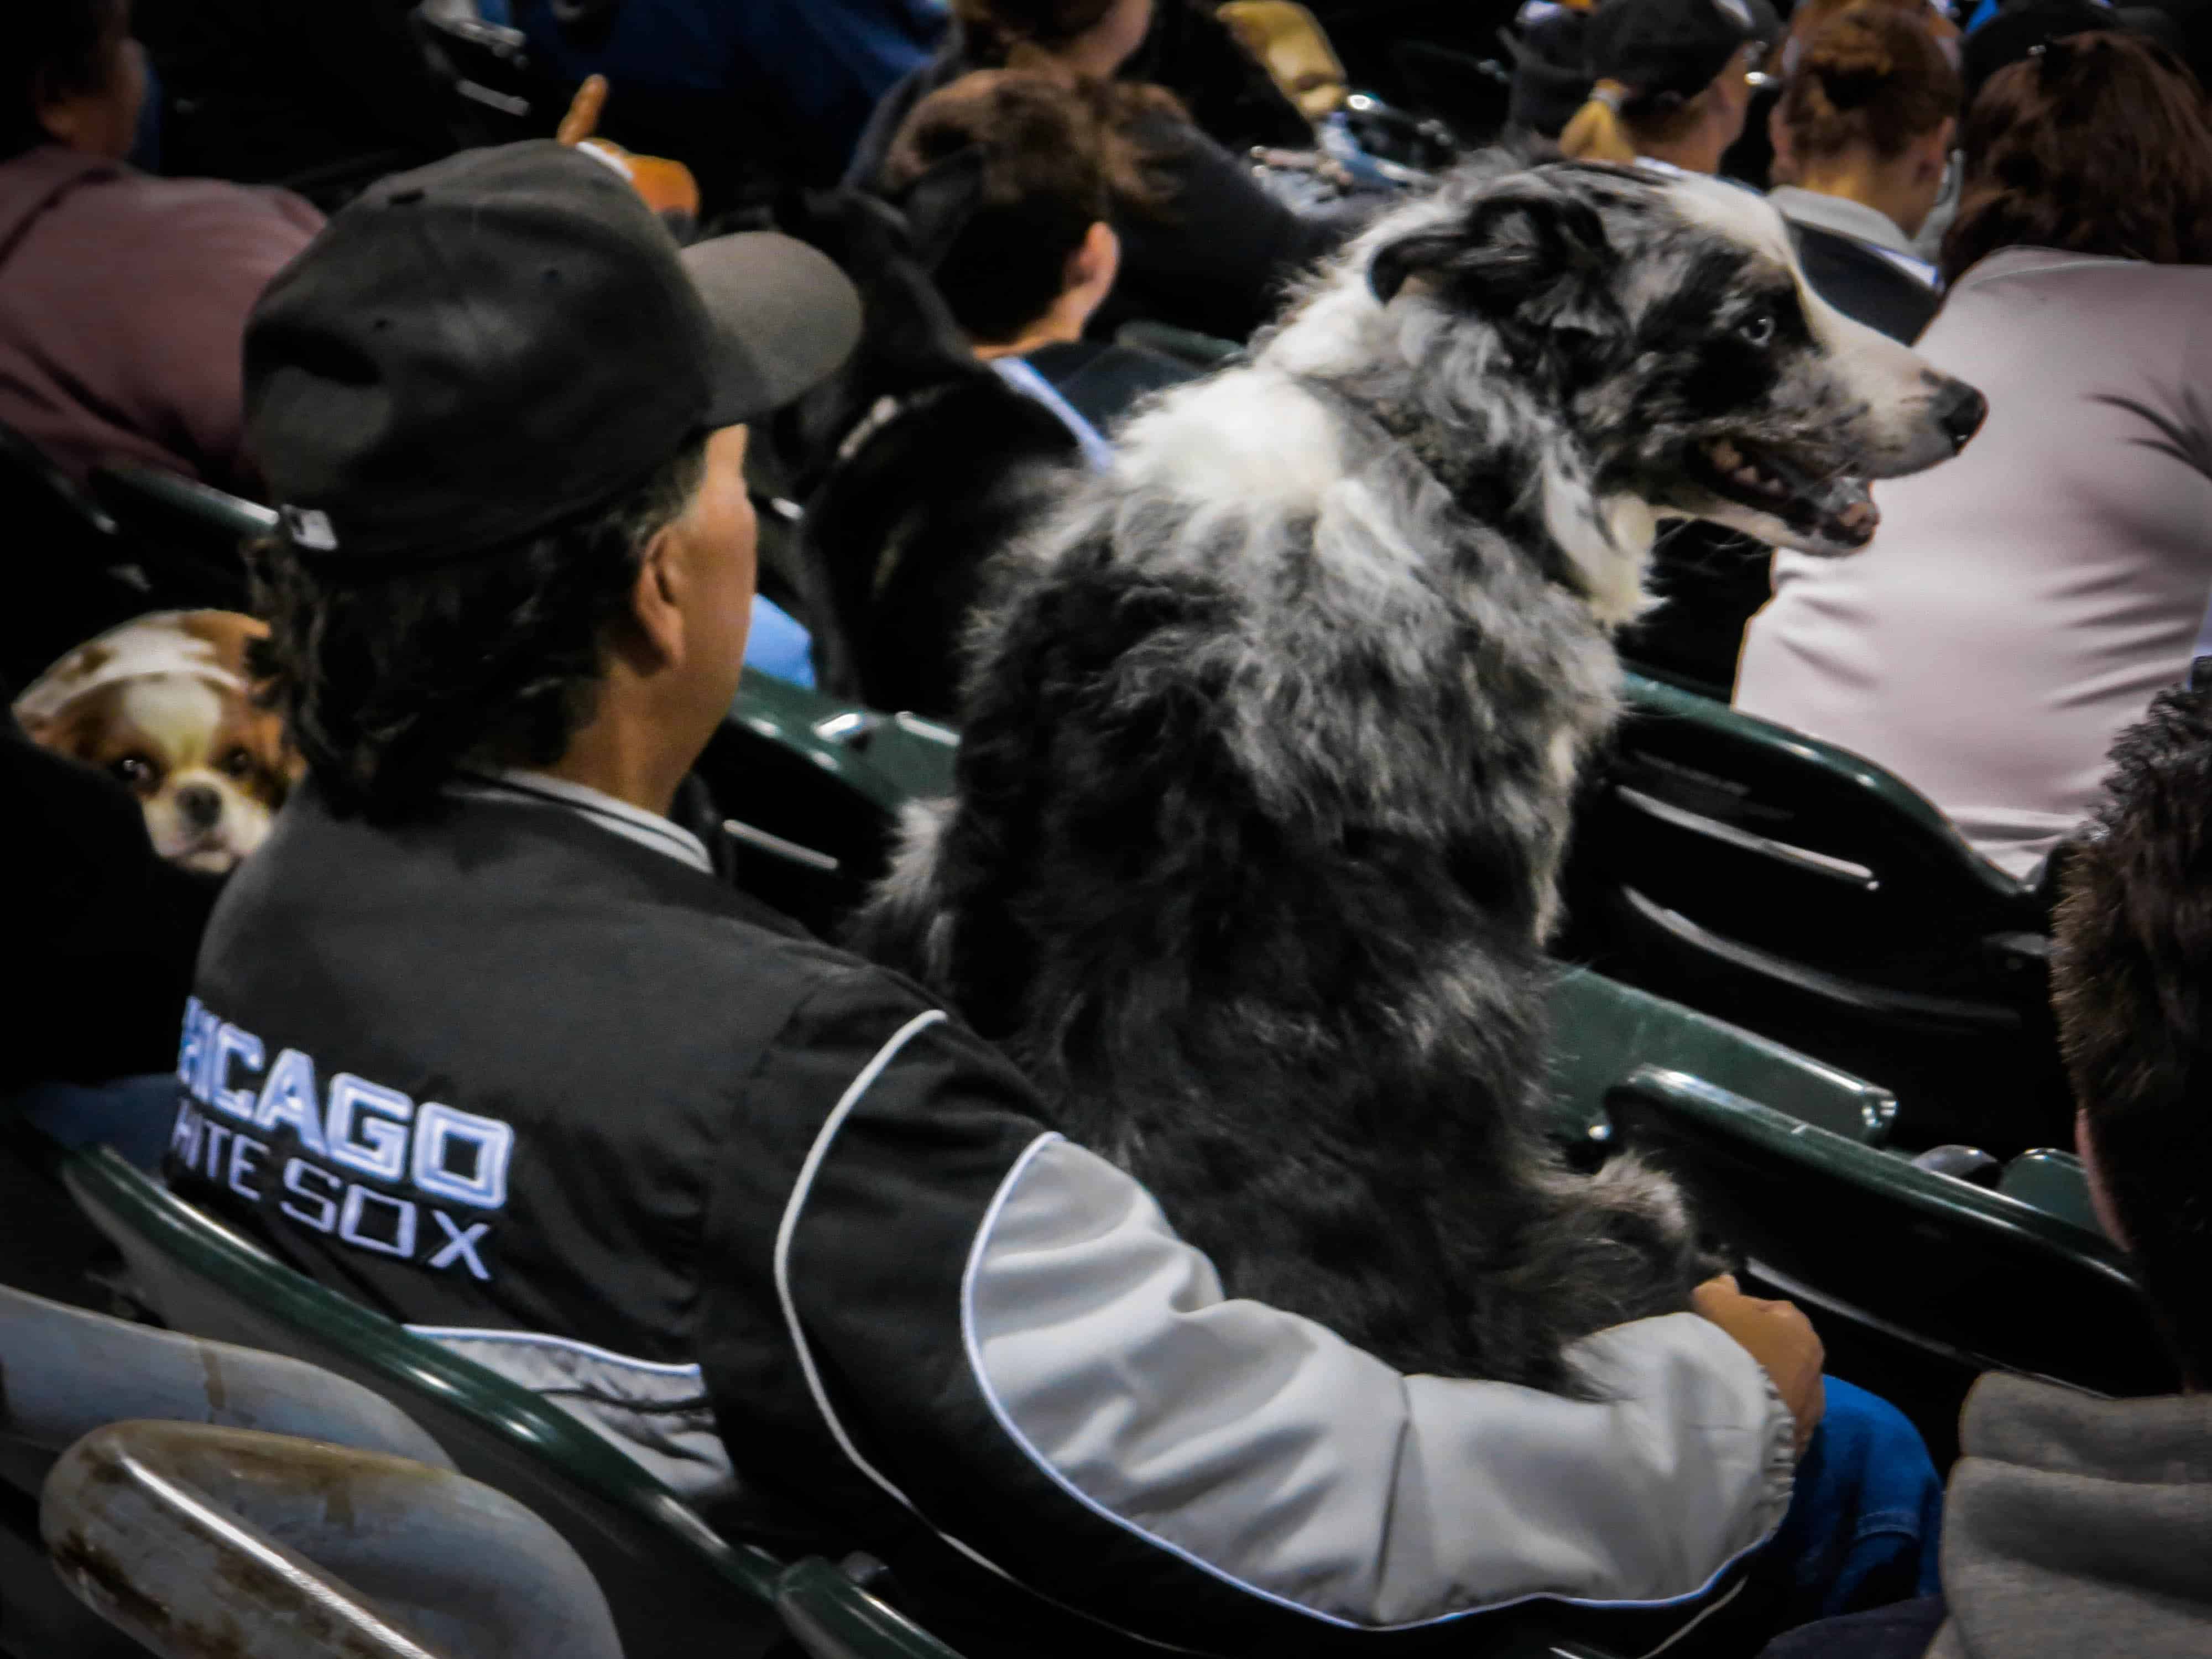 Pet blog, pet adventure, Major League Baseball, dogs, MLB, pooches in the park